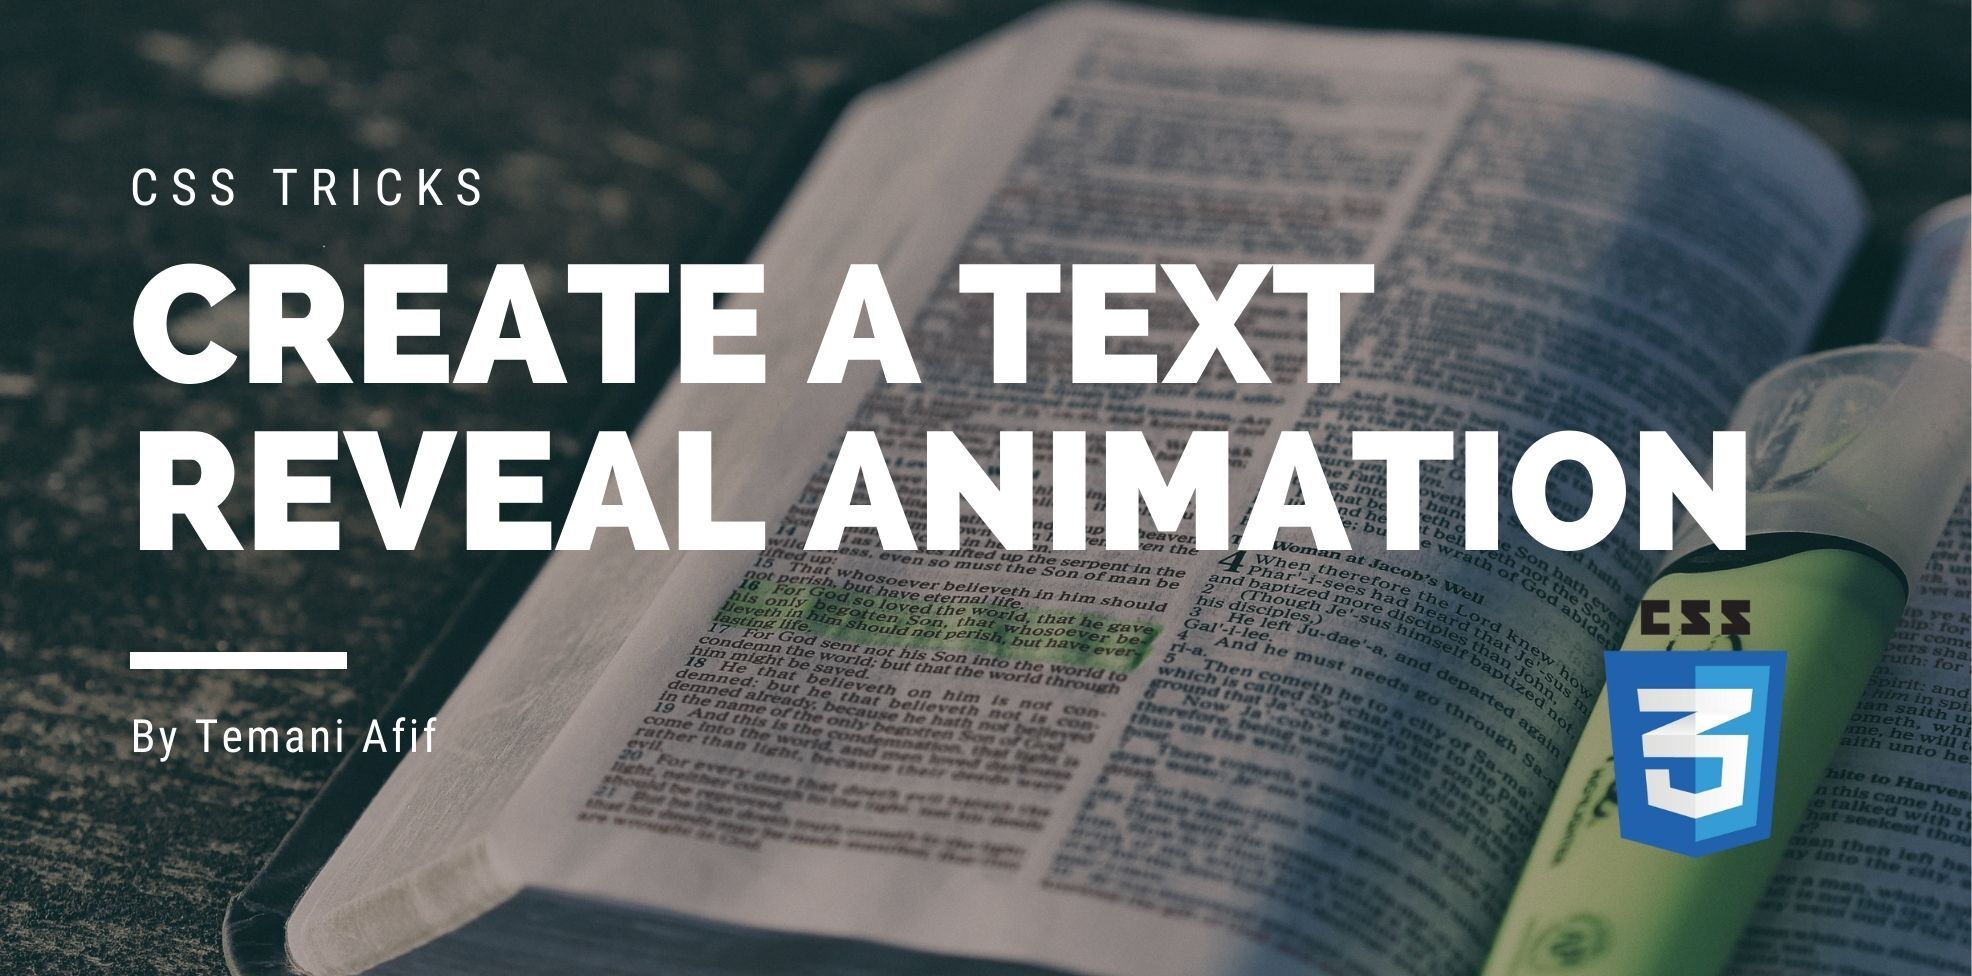 A Text Reveal Animation using CSS